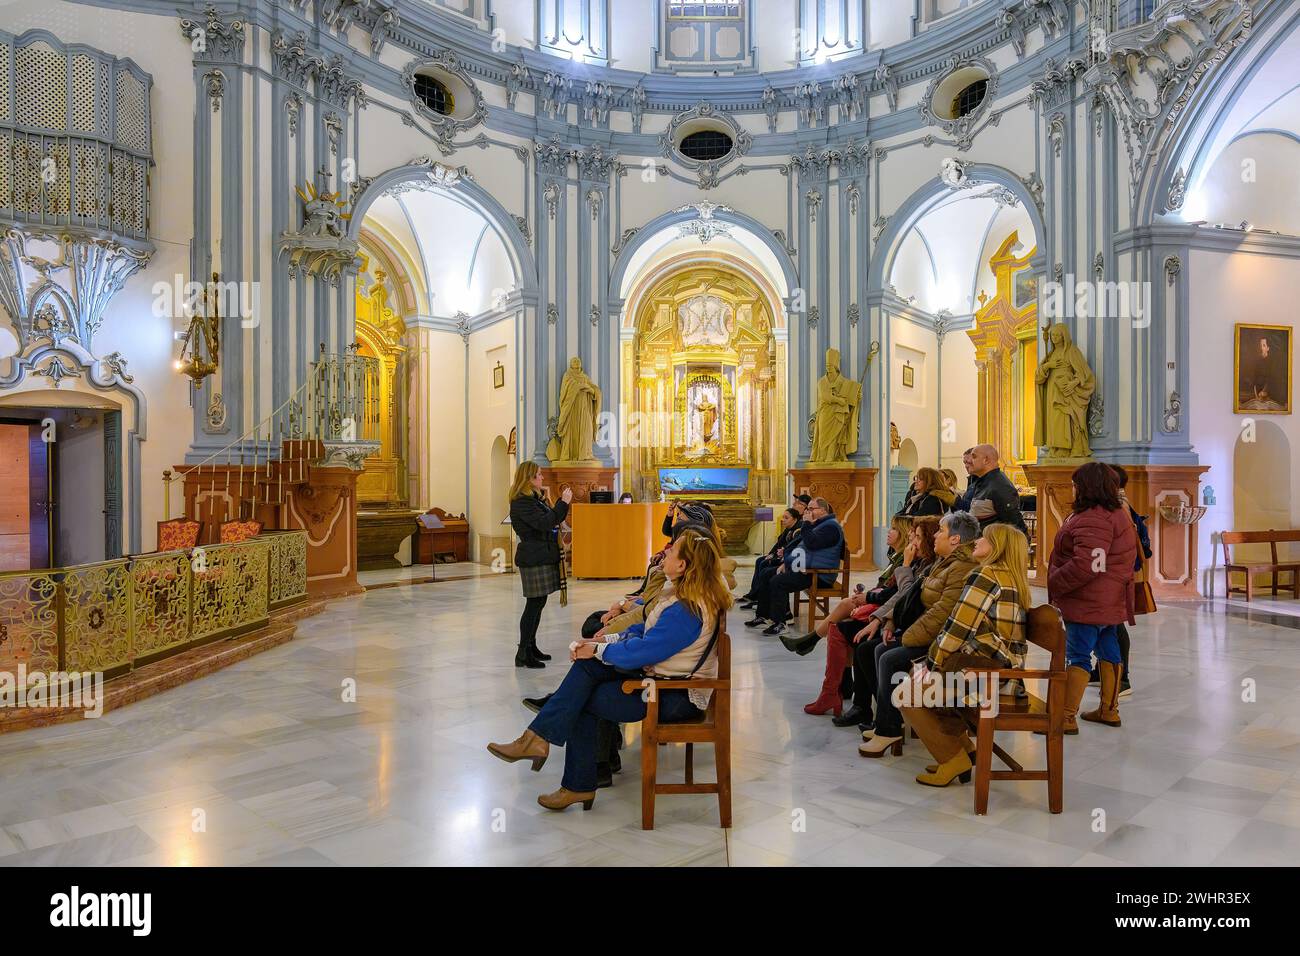 A group of tourists sitting in chairs and listening to a guide explanation. Interior architectural feature of the Museum Church Saint John of God Stock Photo